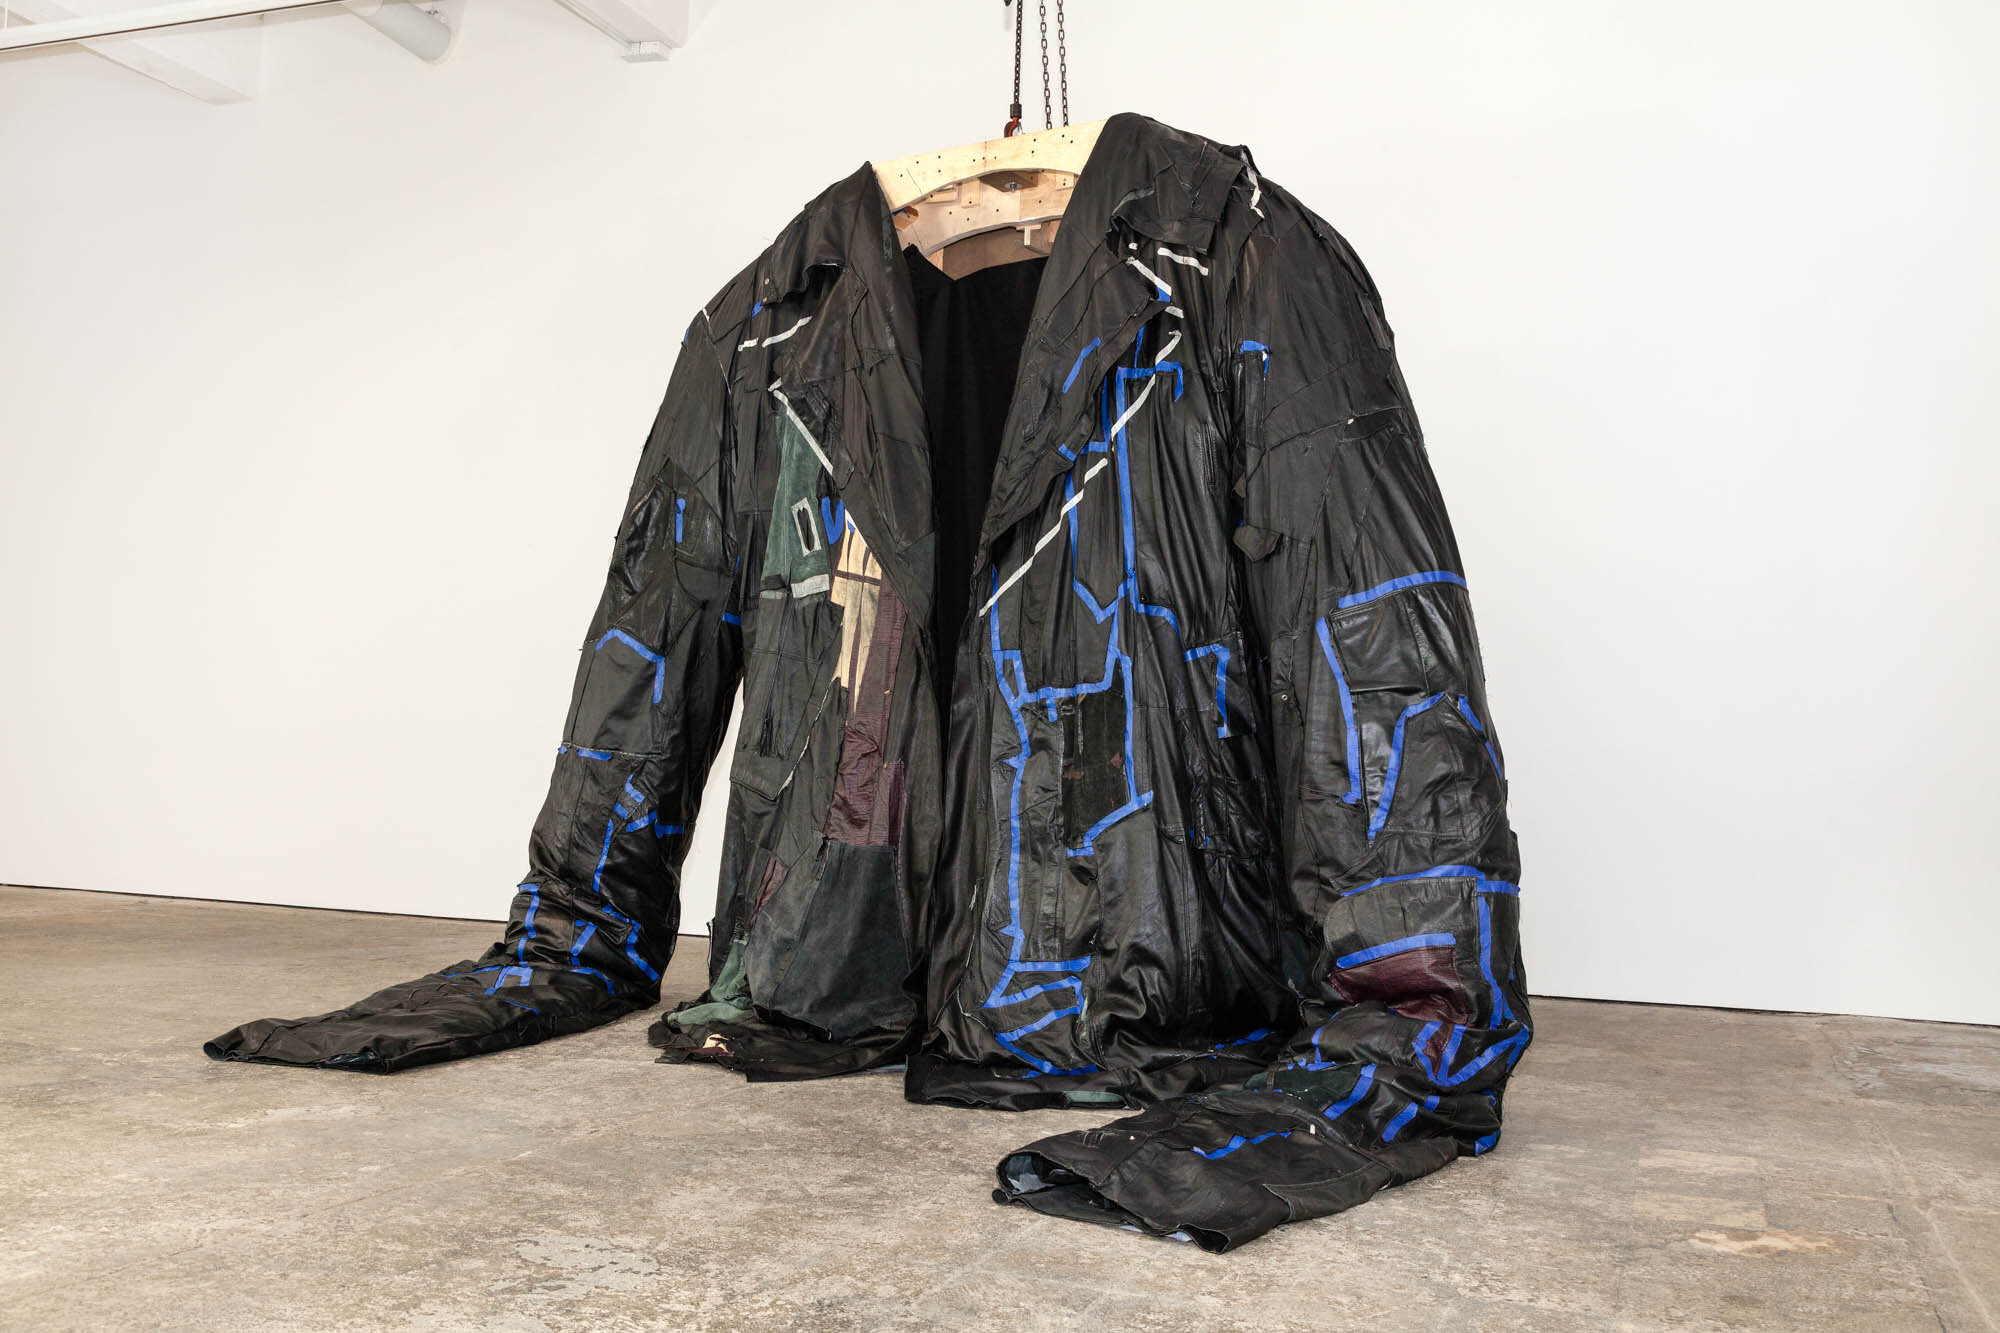       PODERWAĆ , 2017 Leather, cotton, steel, and polyester batting 129 x 102 x 45 in.    MORE IMAGES   The Fabric Workshop and Museum   The National Museum Of Women In The Arts  